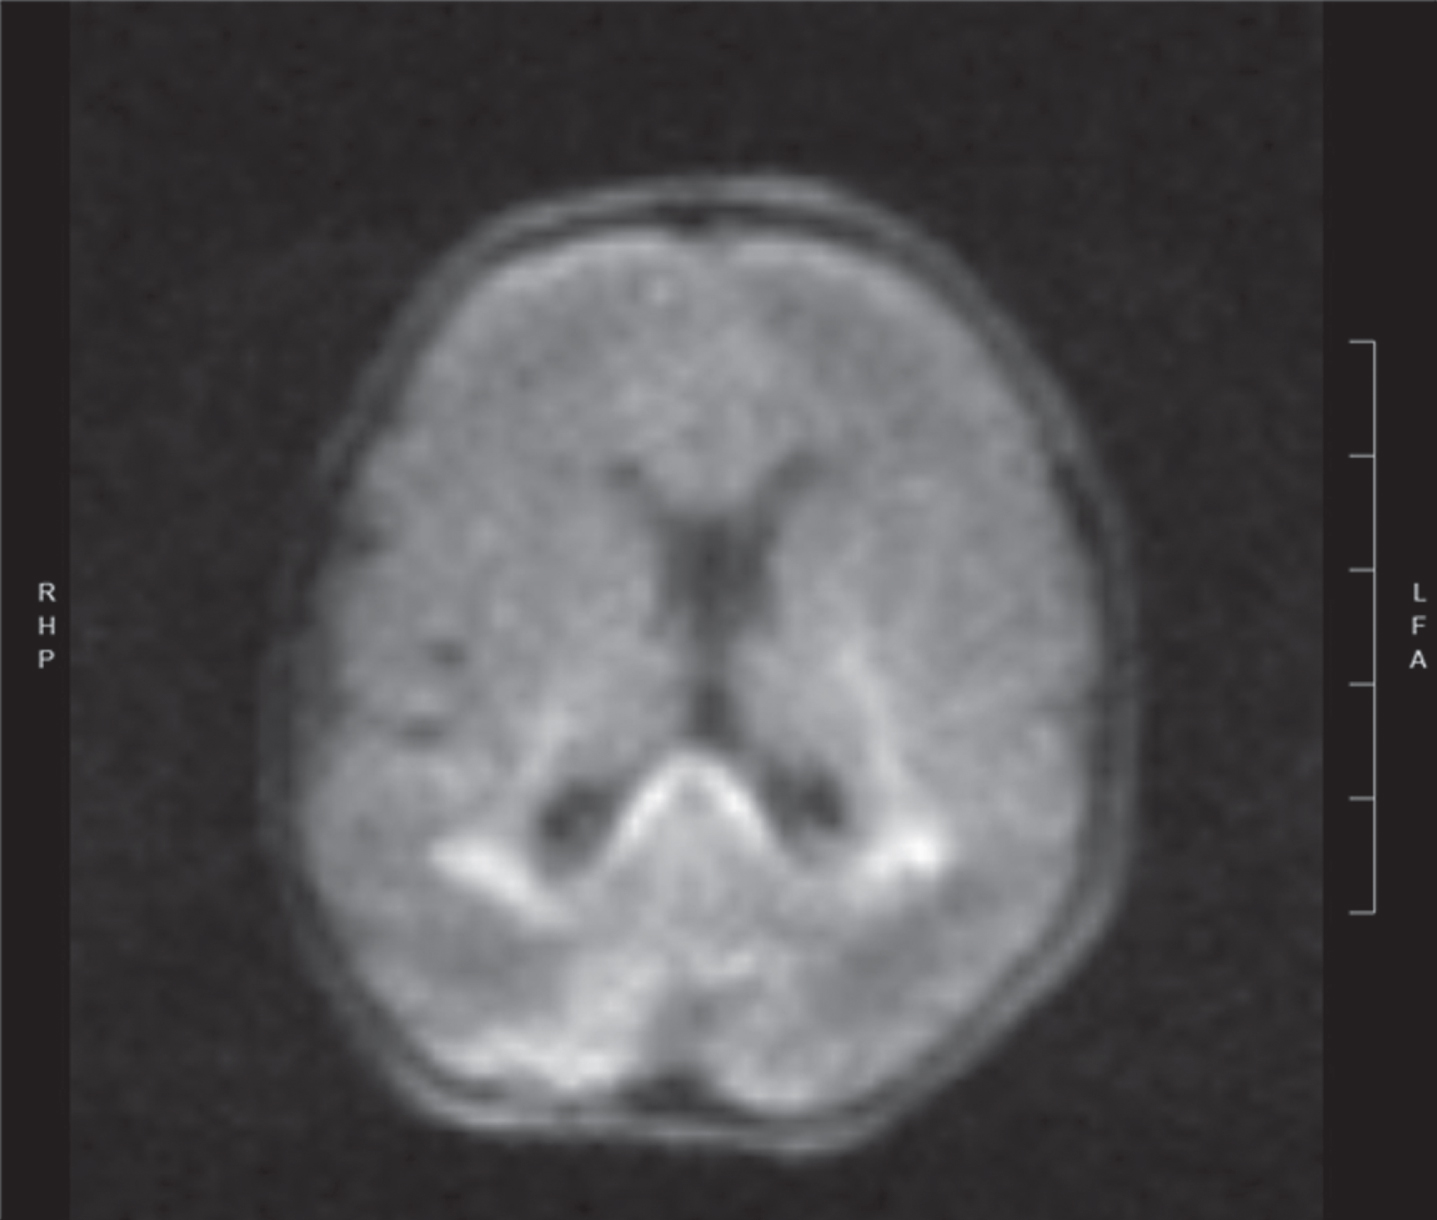 Diffusion weighted image of same newborn at day 3 of life showing areas of acute white matter injury with restricted diffusion